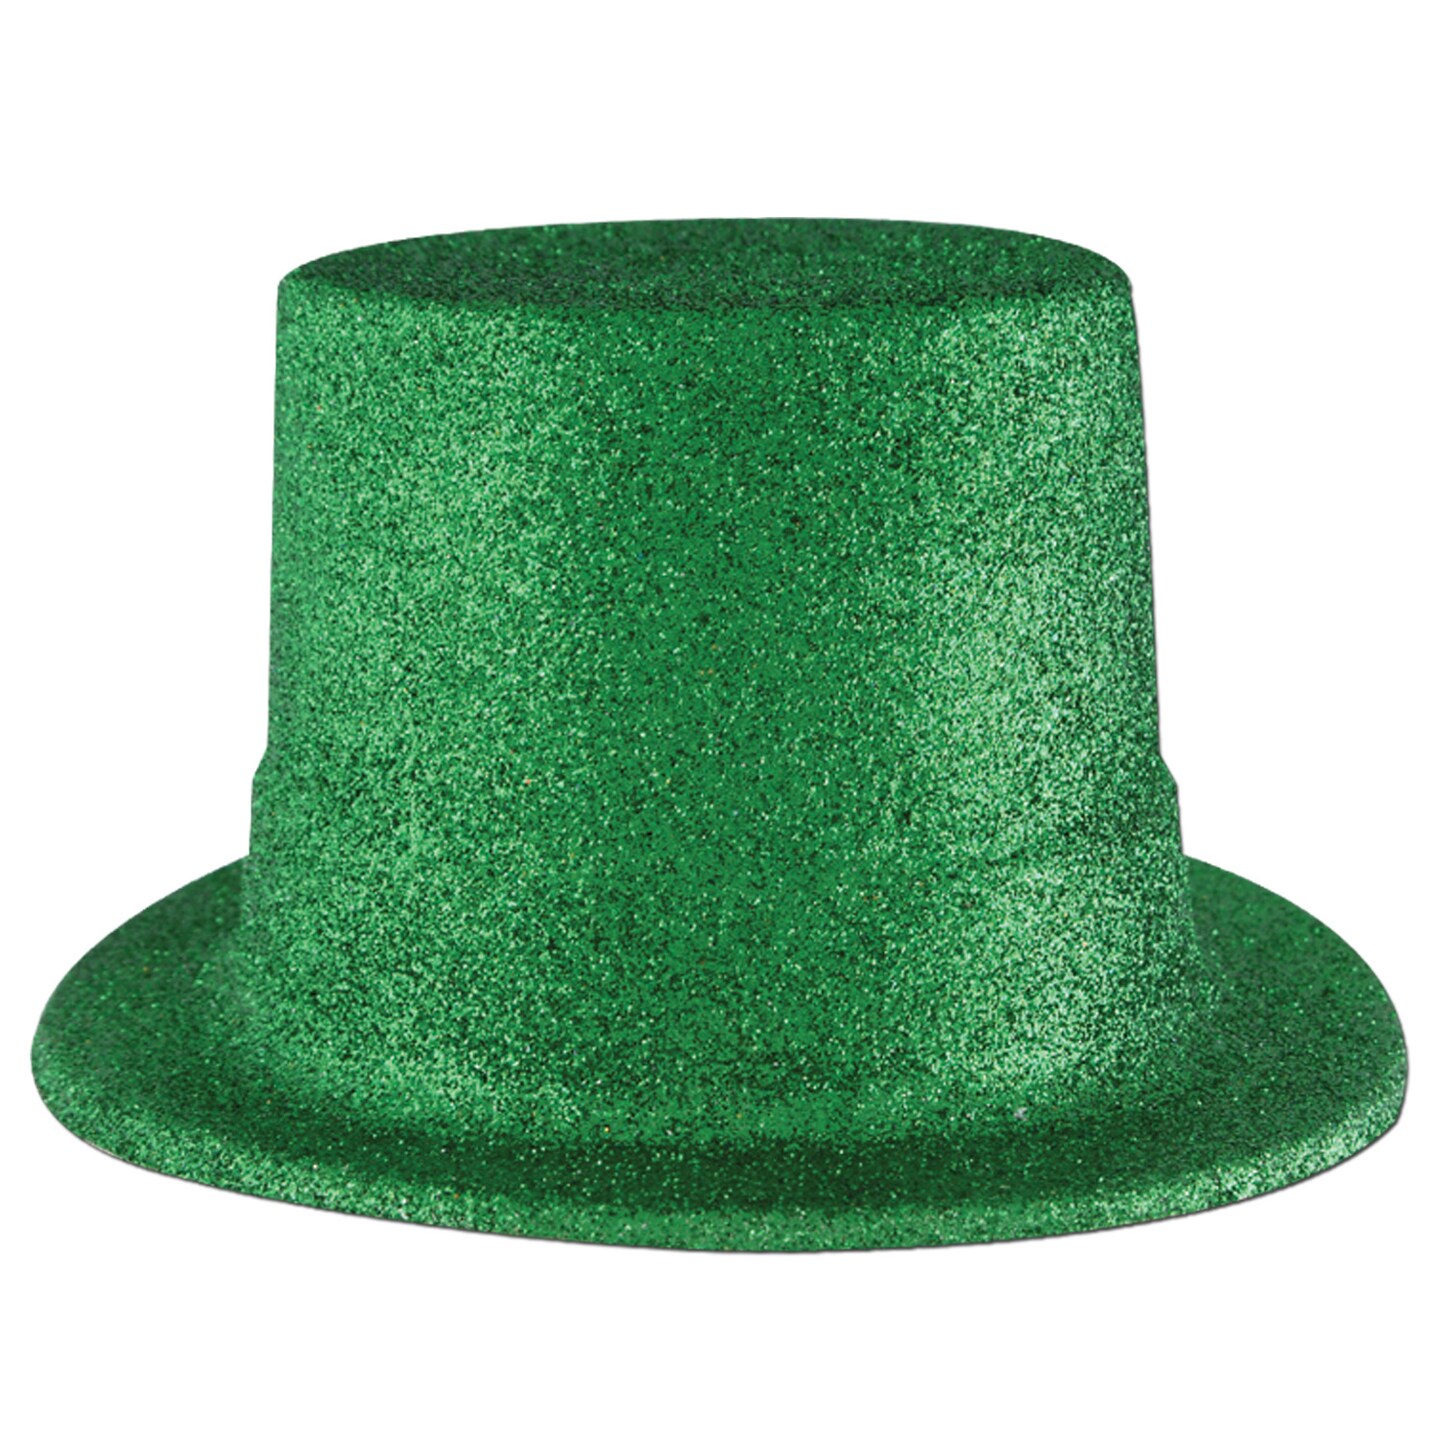 St. Patricks Theme - Green Glittered Top Hat - Pack of 24